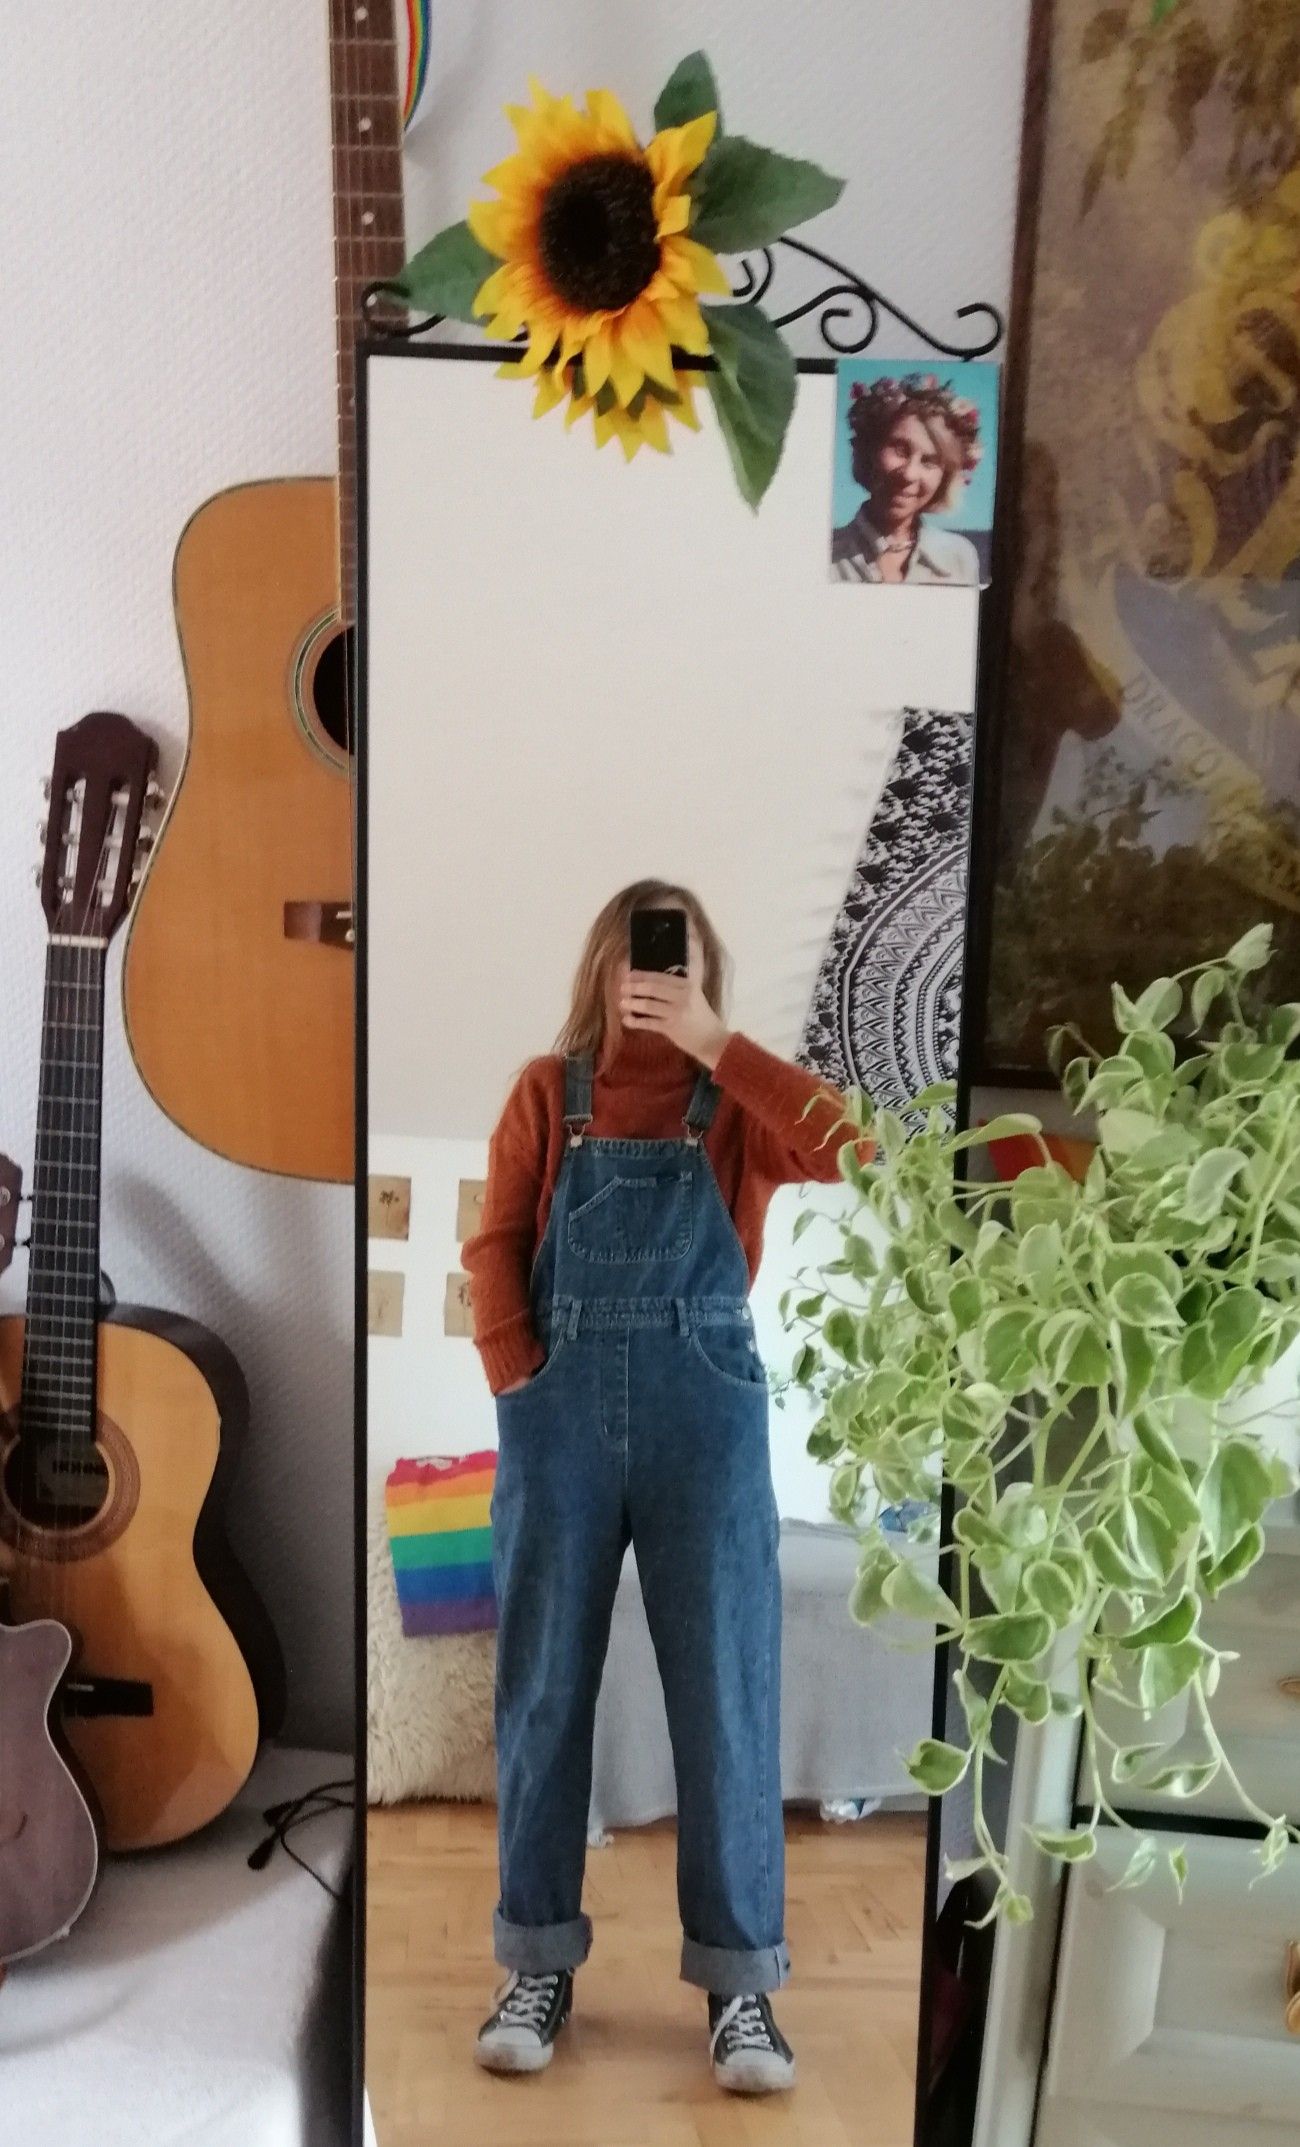 Dungaree Outfit Ideas